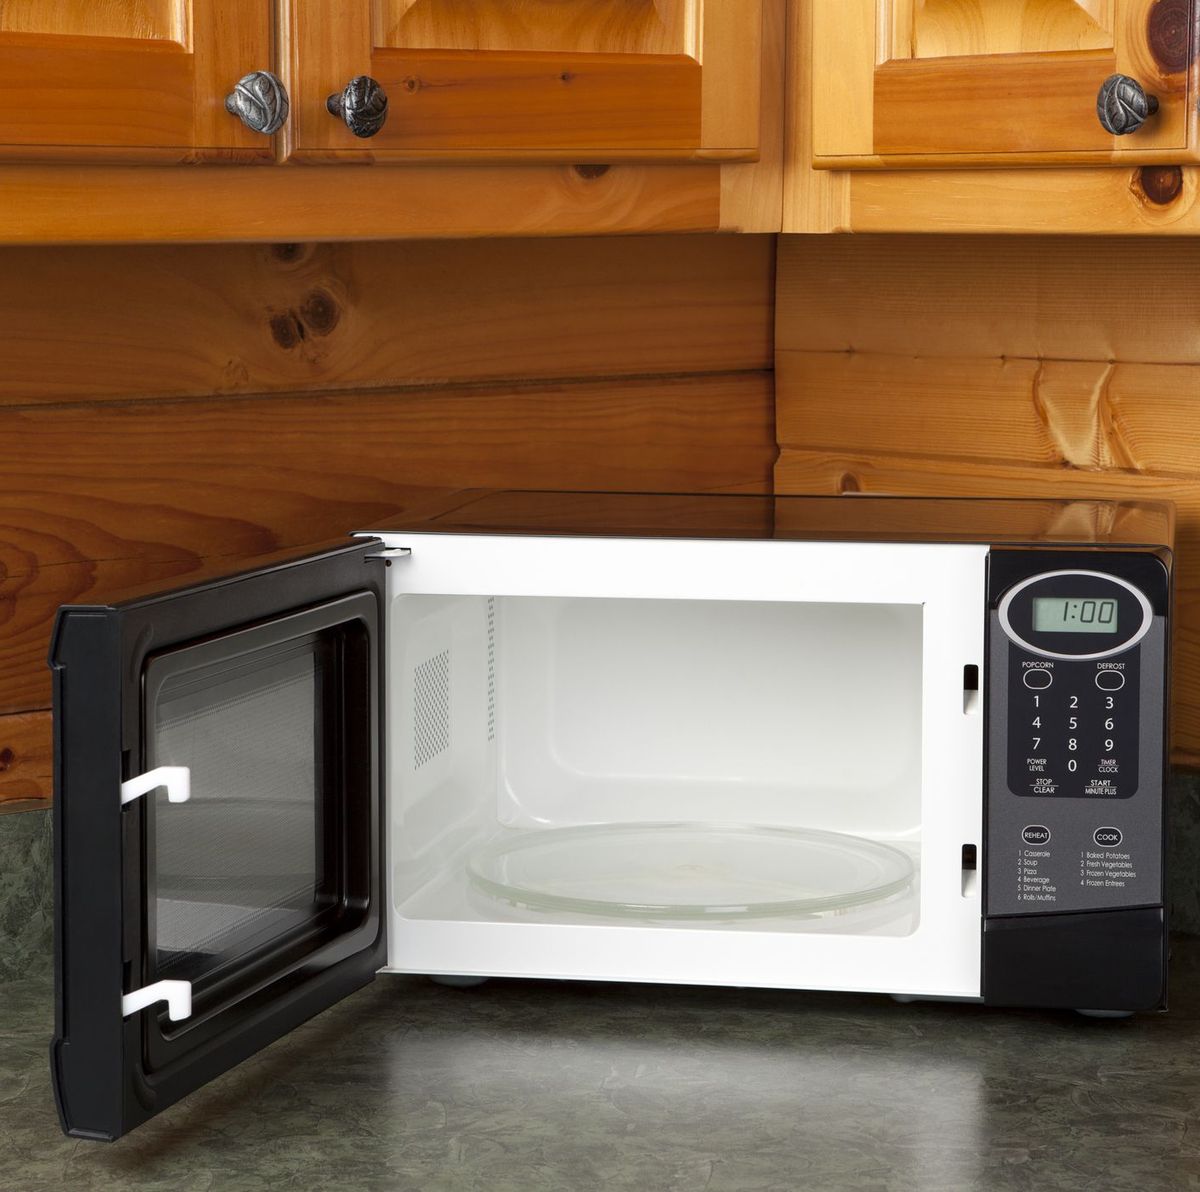 The Complete Guide to Cleaning a Microwave - Home Plus Cleaning